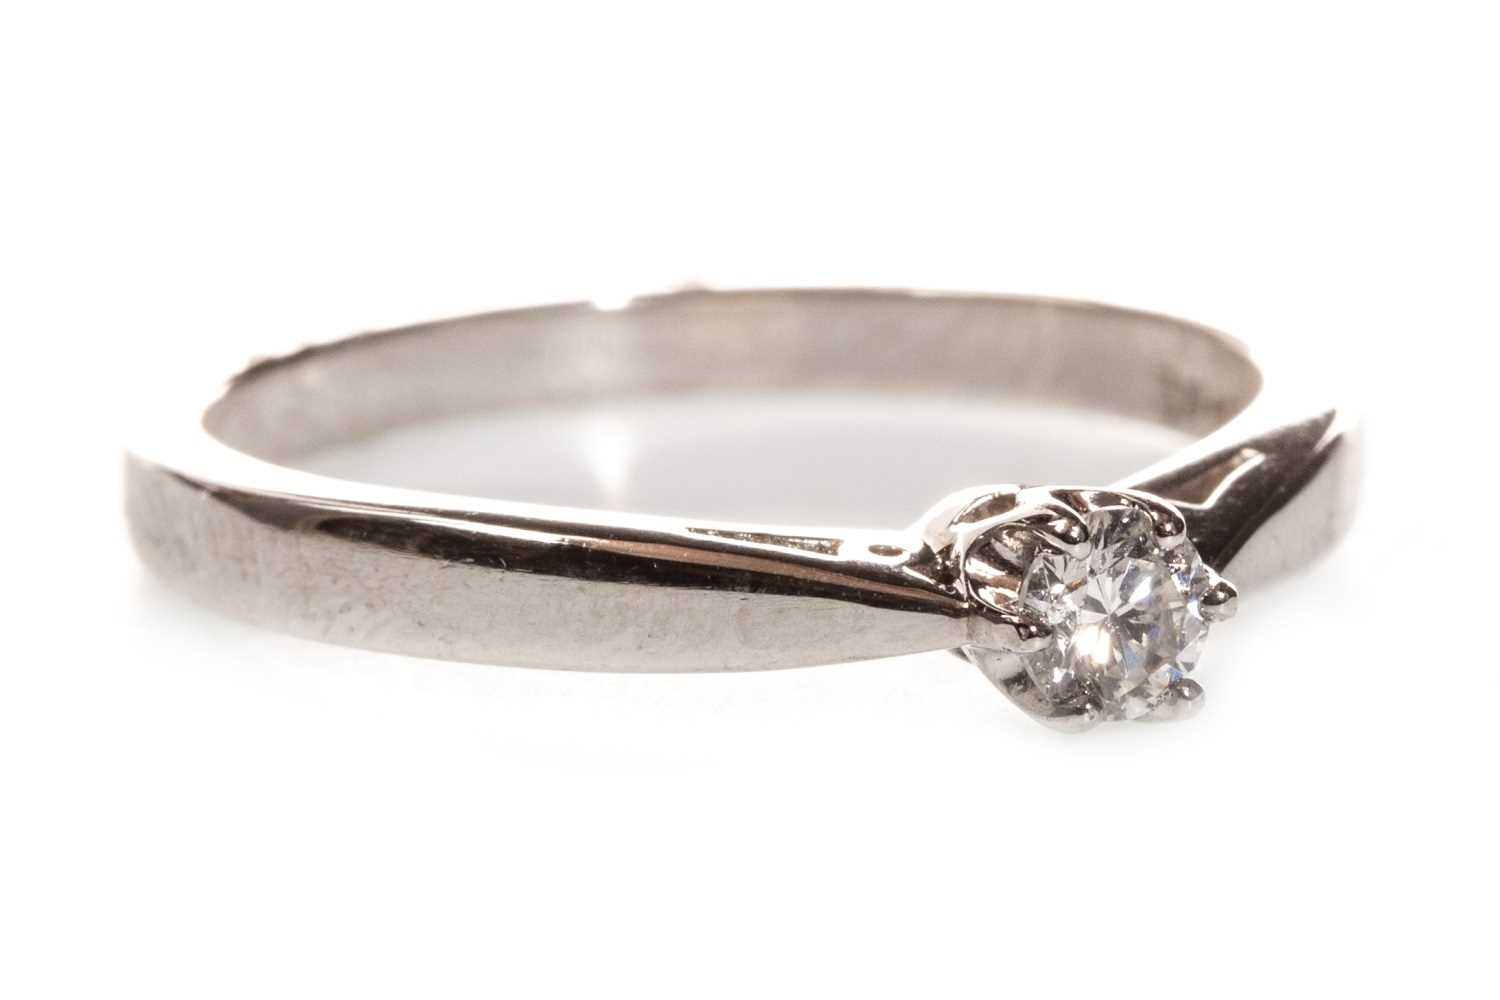 Lot 122 - A DIAMOND SOLITAIRE RING